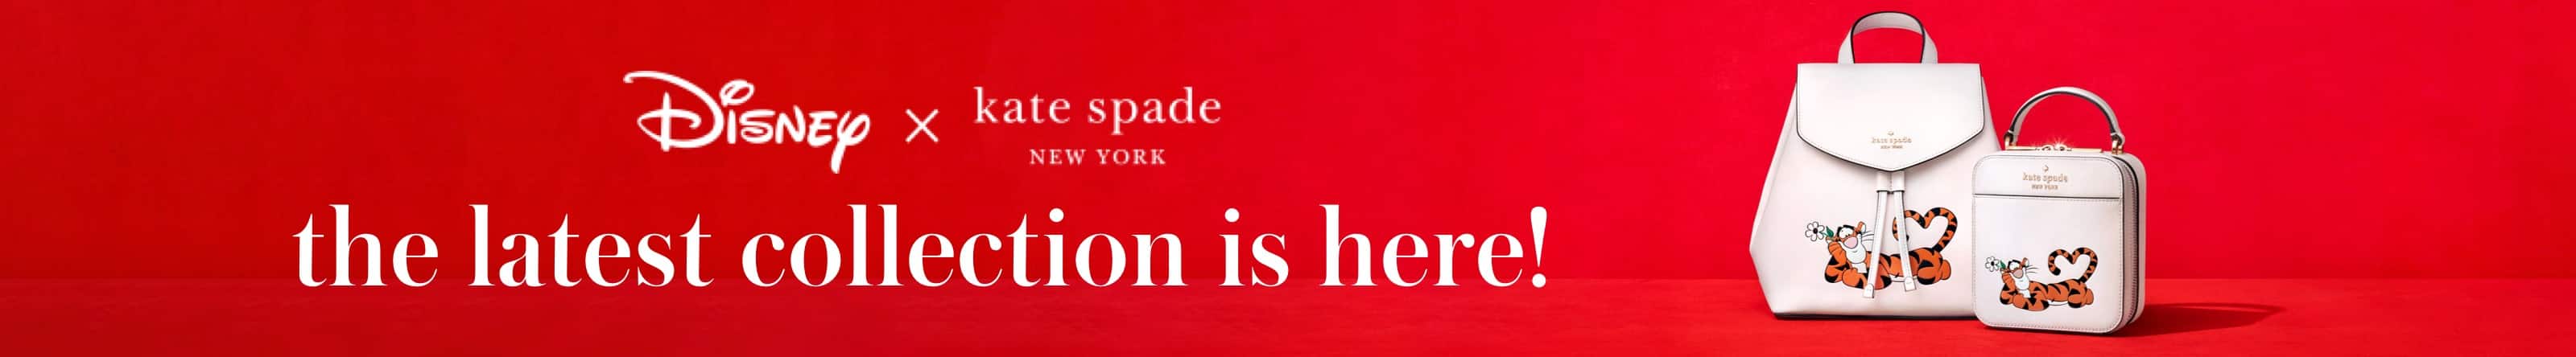 disney x kate spade new york the latest collection is here!